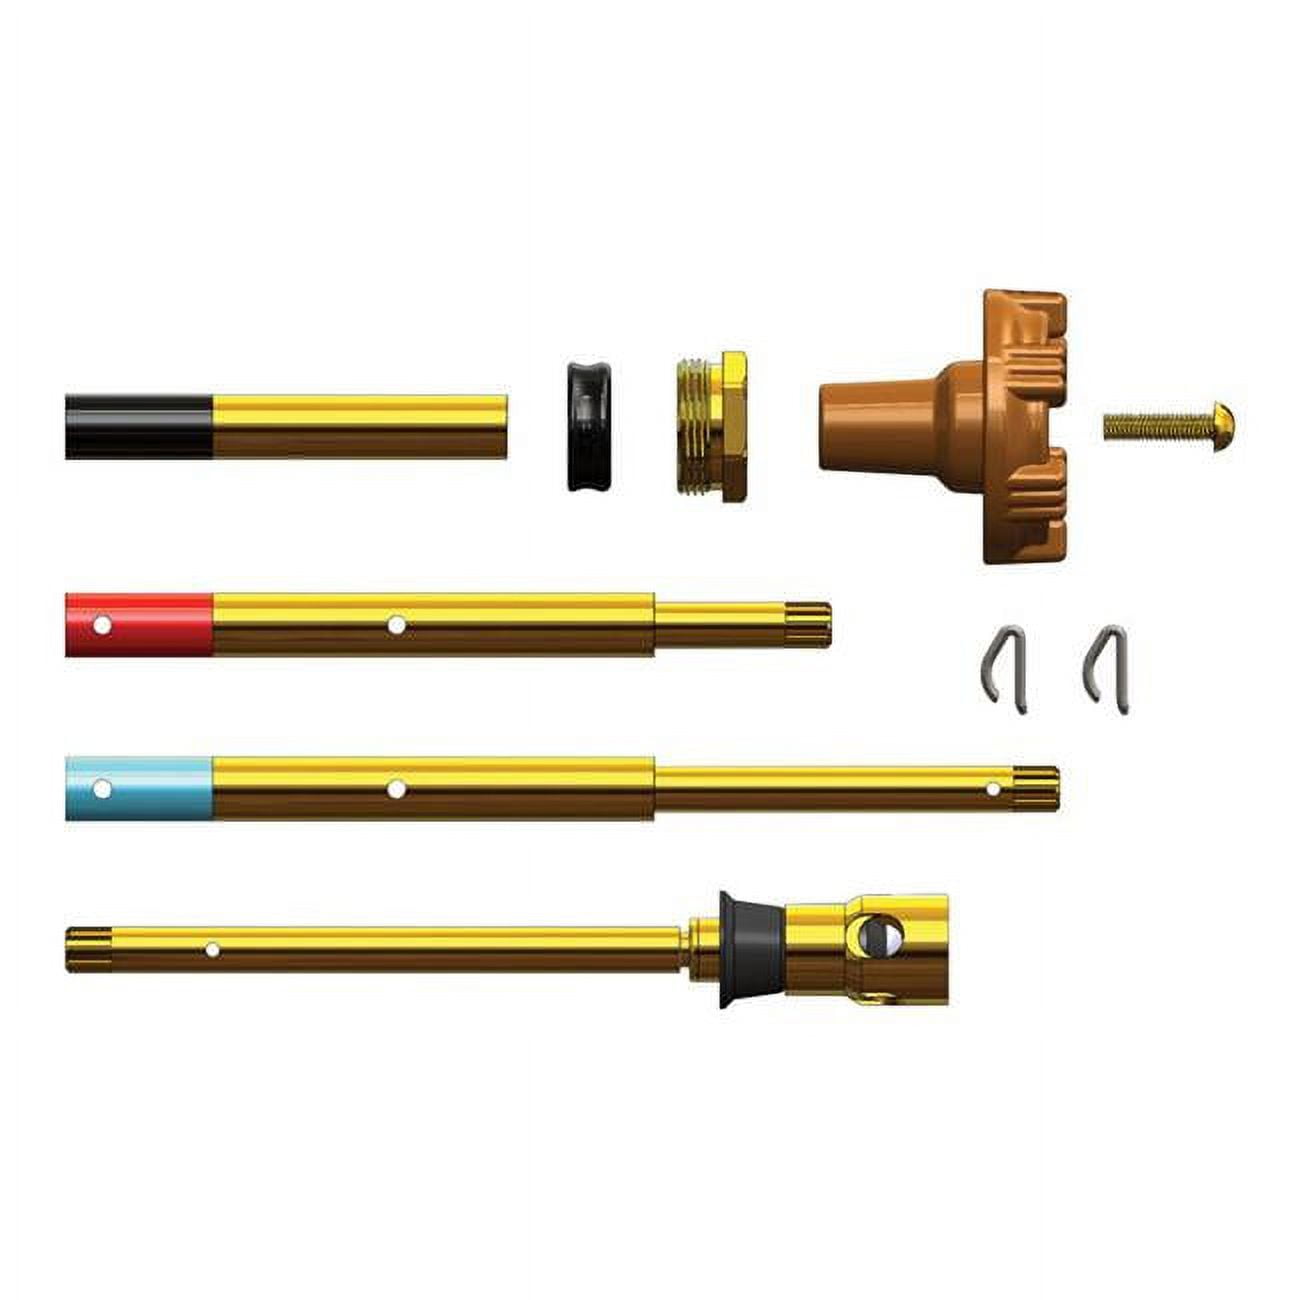 4808044 Brass Frost-proof Adjustable Rod With Pressure Relief Valve